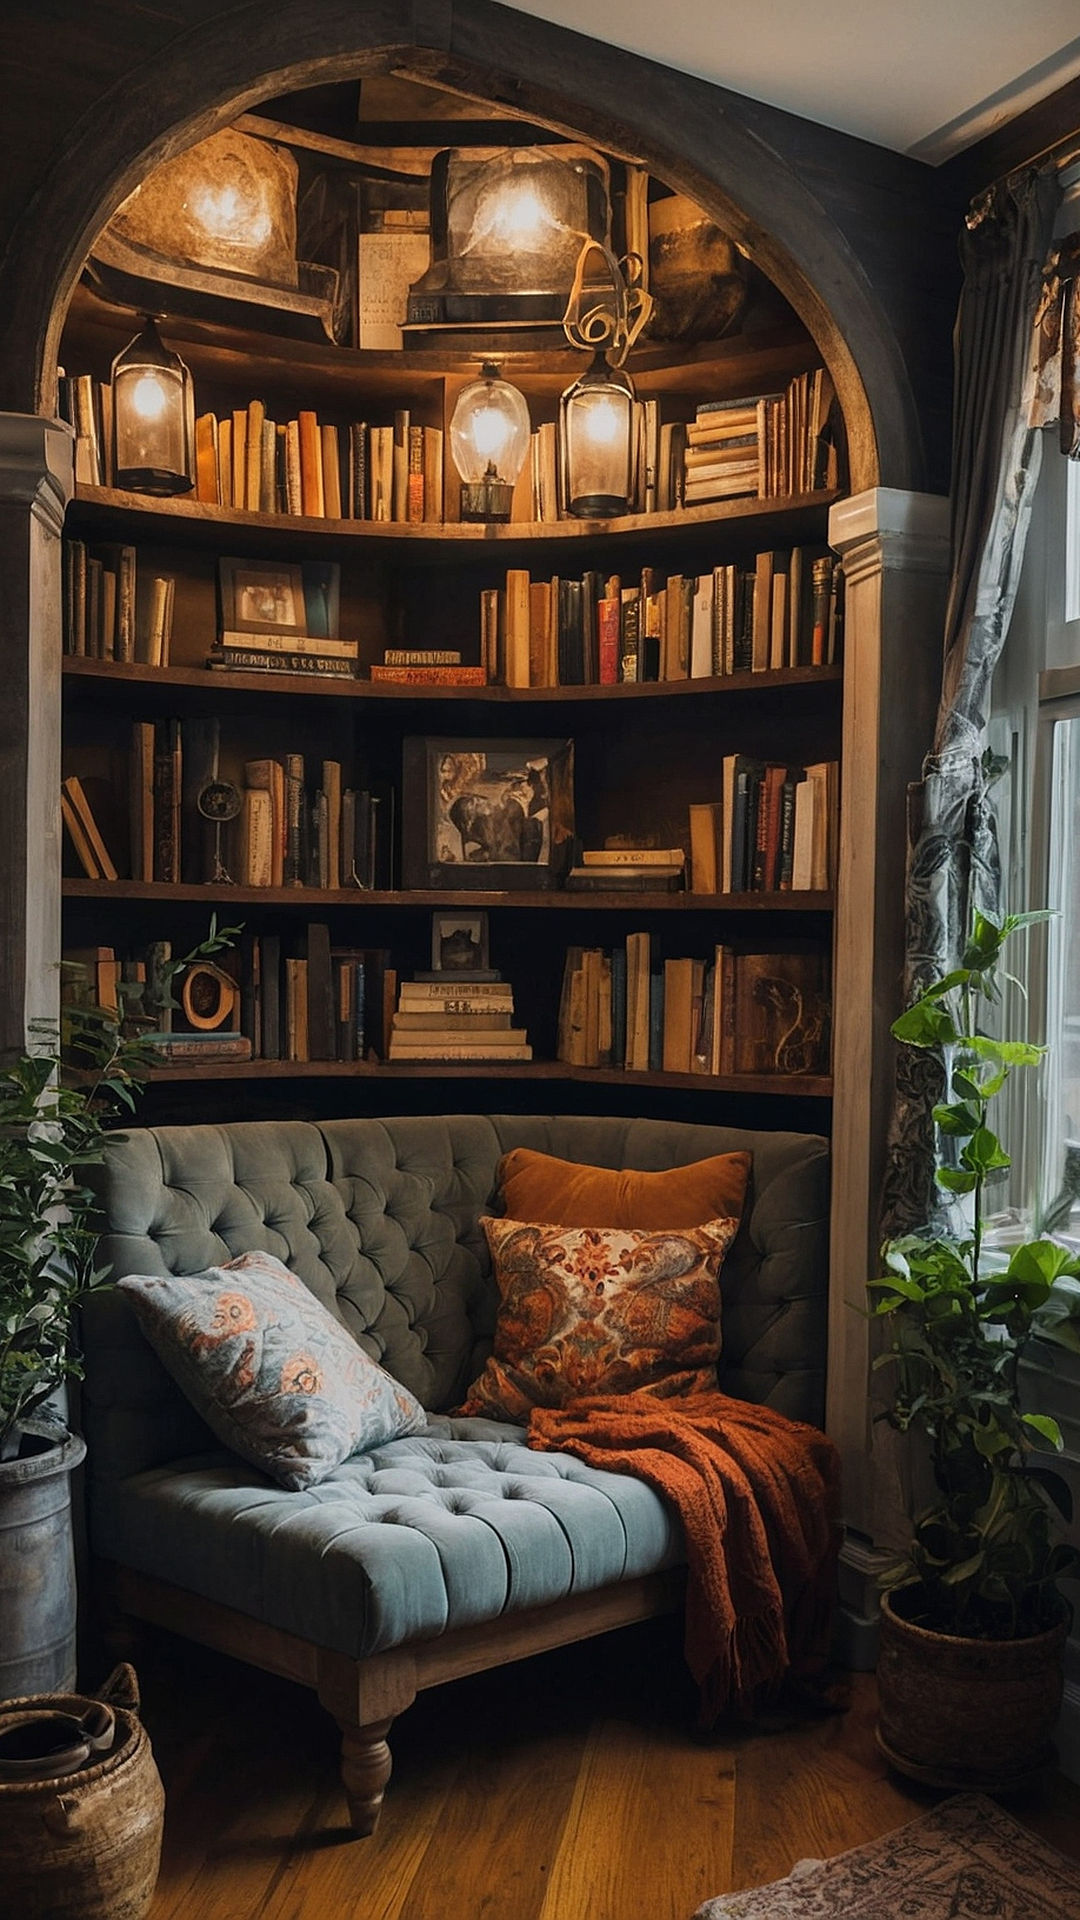 She-Space: Unconventional Women Cave Ideas